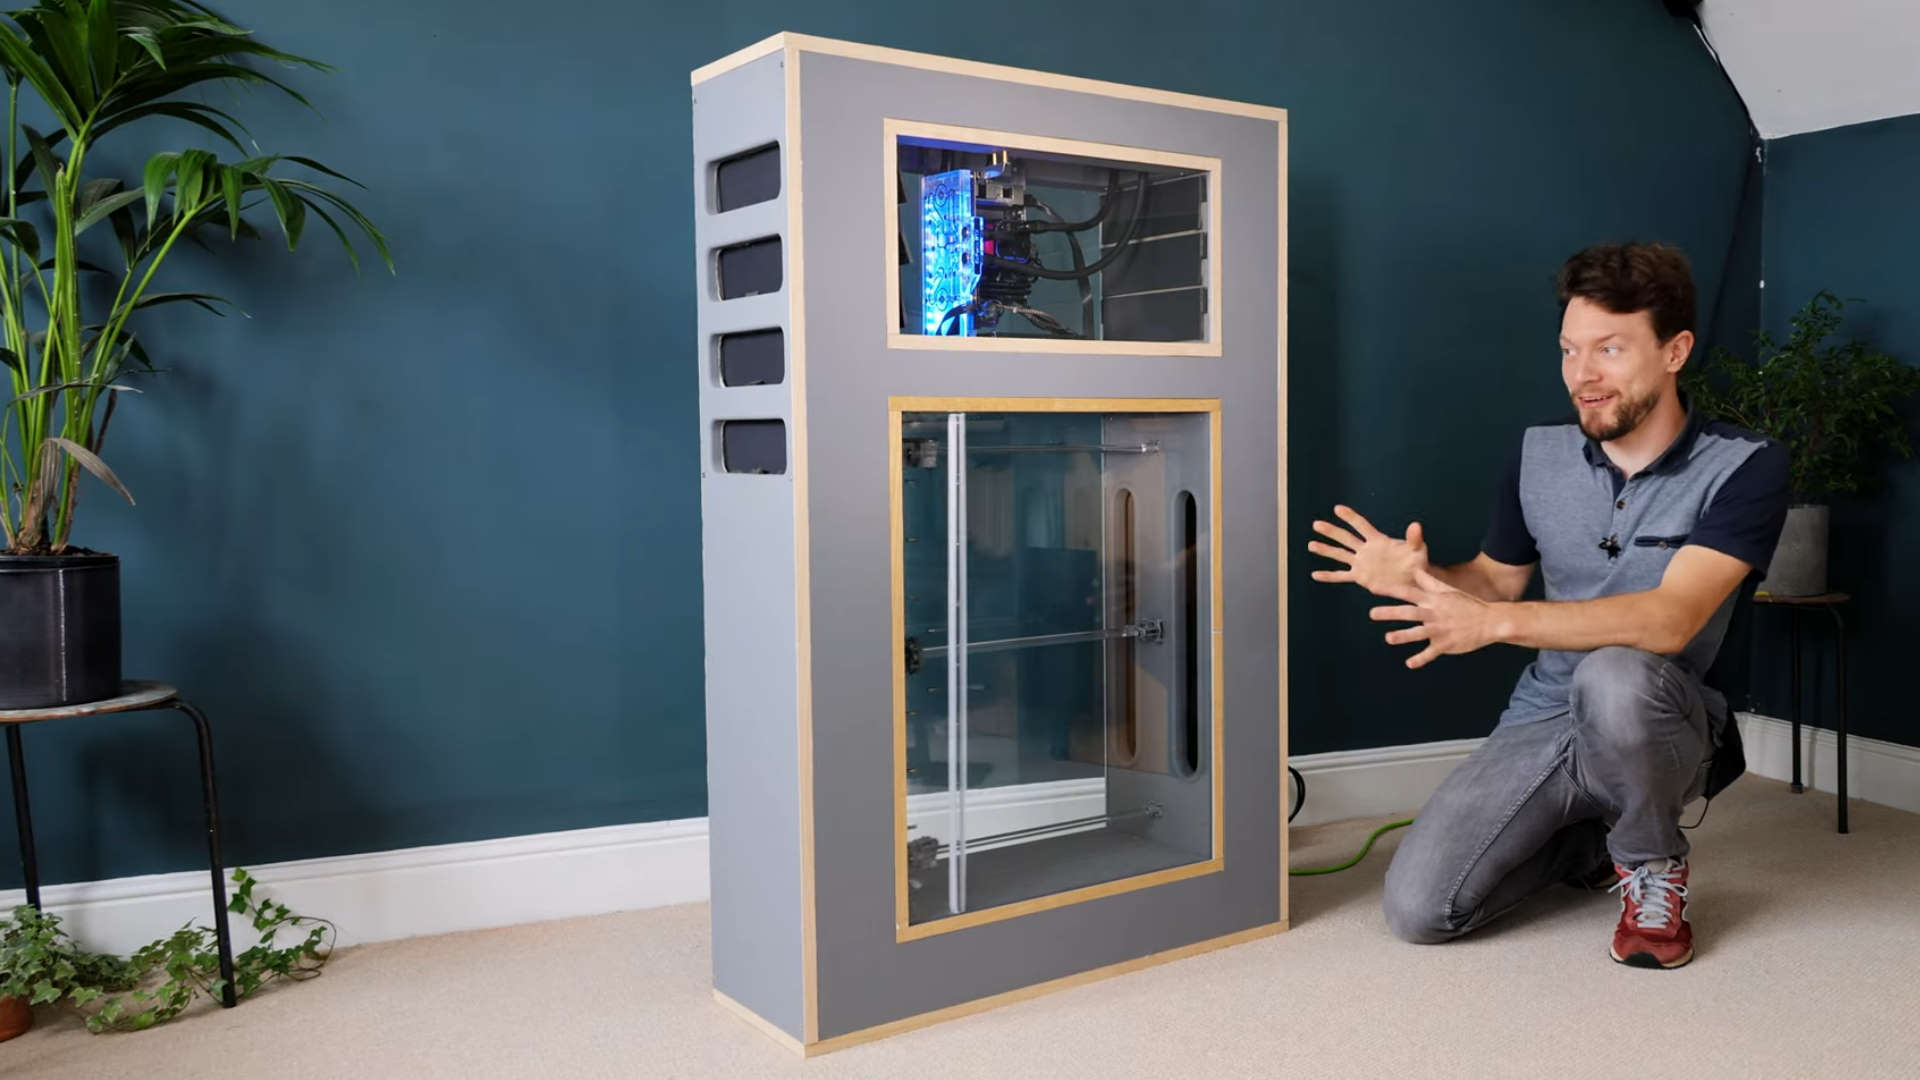  Welcome the world's first PC cooled by magnetized bellows 